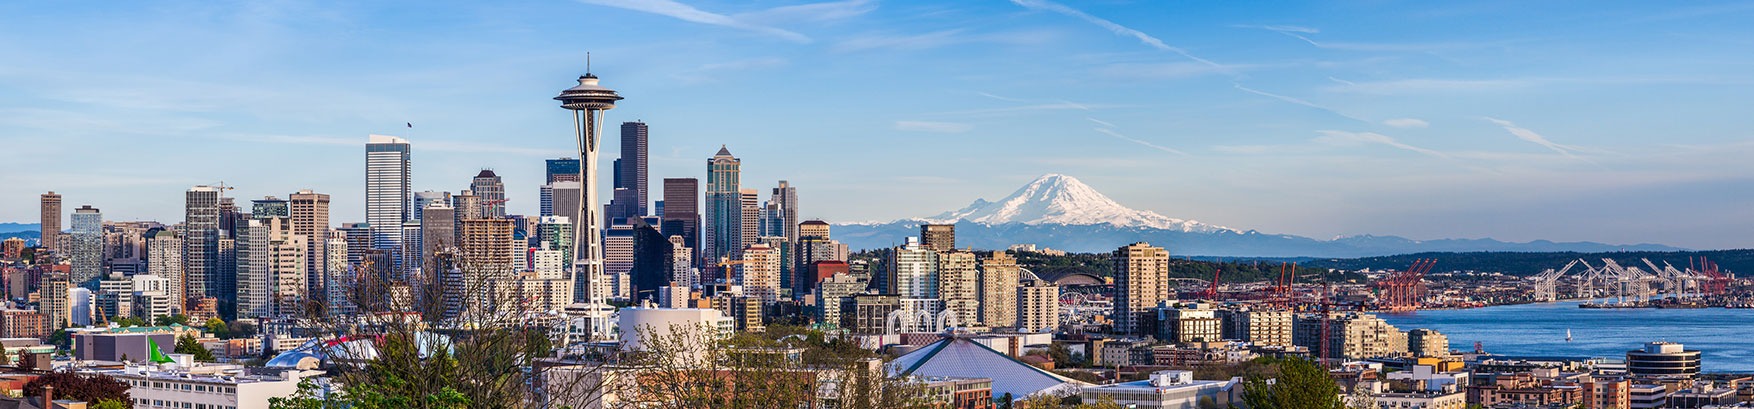 City skyline in Seattle, an area served by Washington car accident lawyer Super Woman Super Lawyer